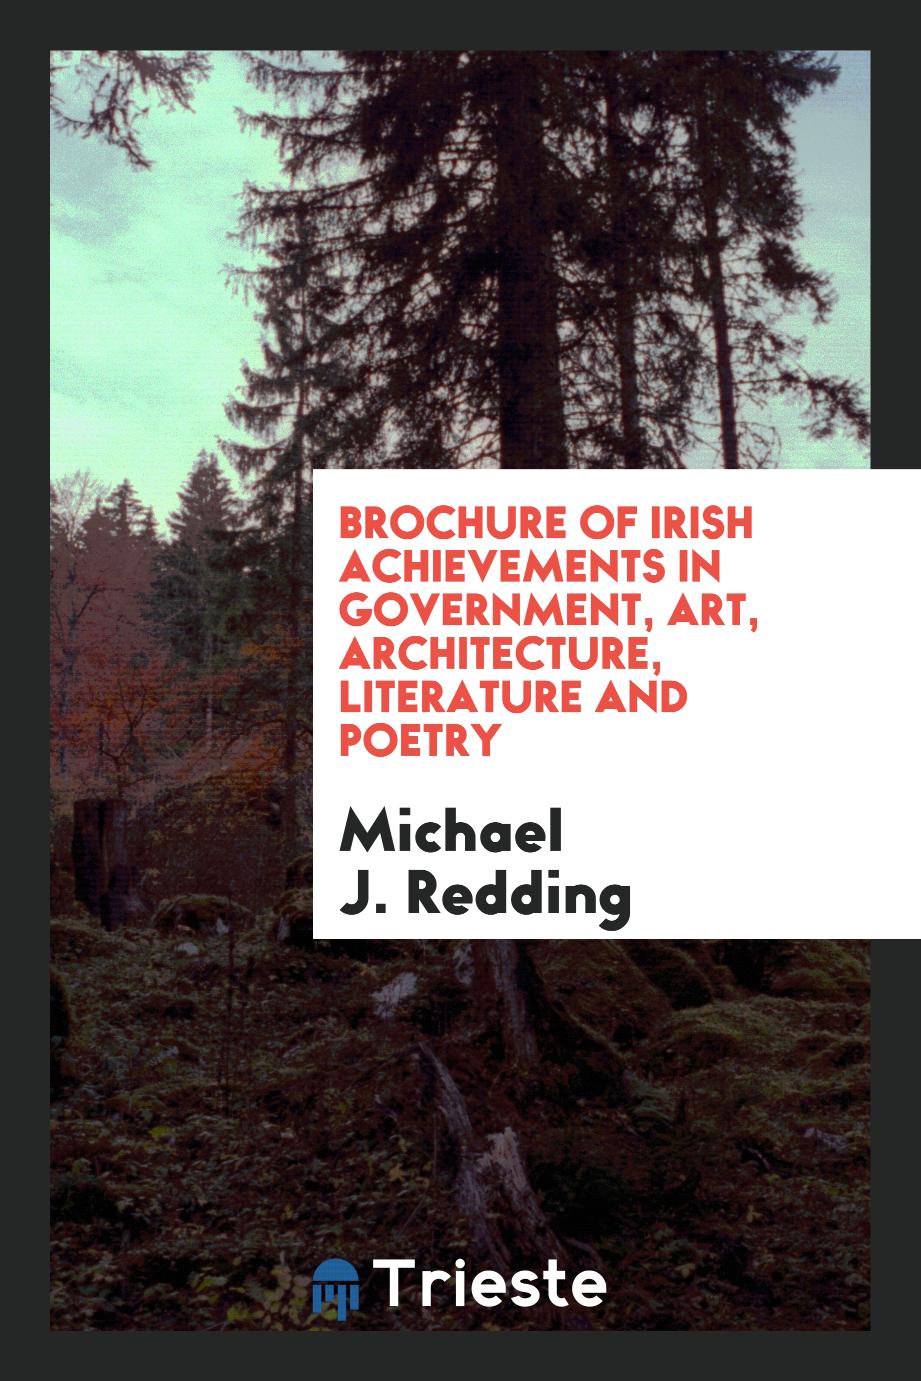 Brochure of Irish Achievements in Government, Art, Architecture, Literature and Poetry